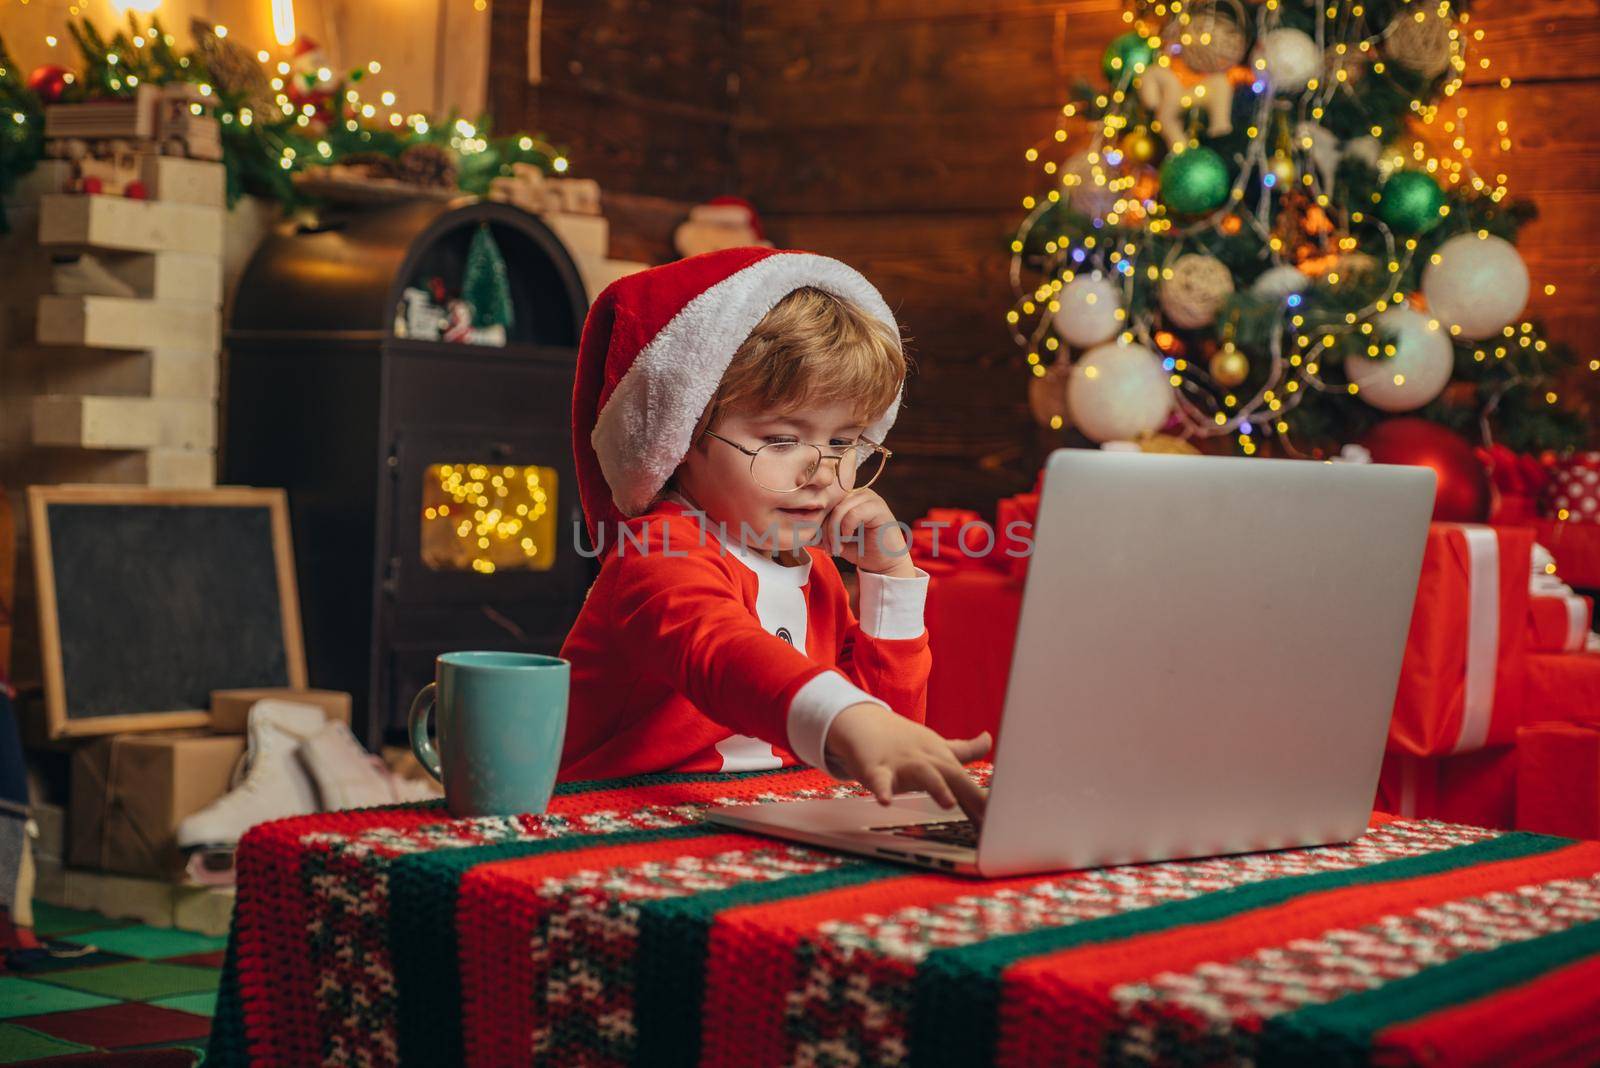 Gifts service. Smart toddler surfing internet. Helper of Santa with a Christmas magic gifts. Christmas. Home. Christmas time. Little boy in Santa hat and costume having fun